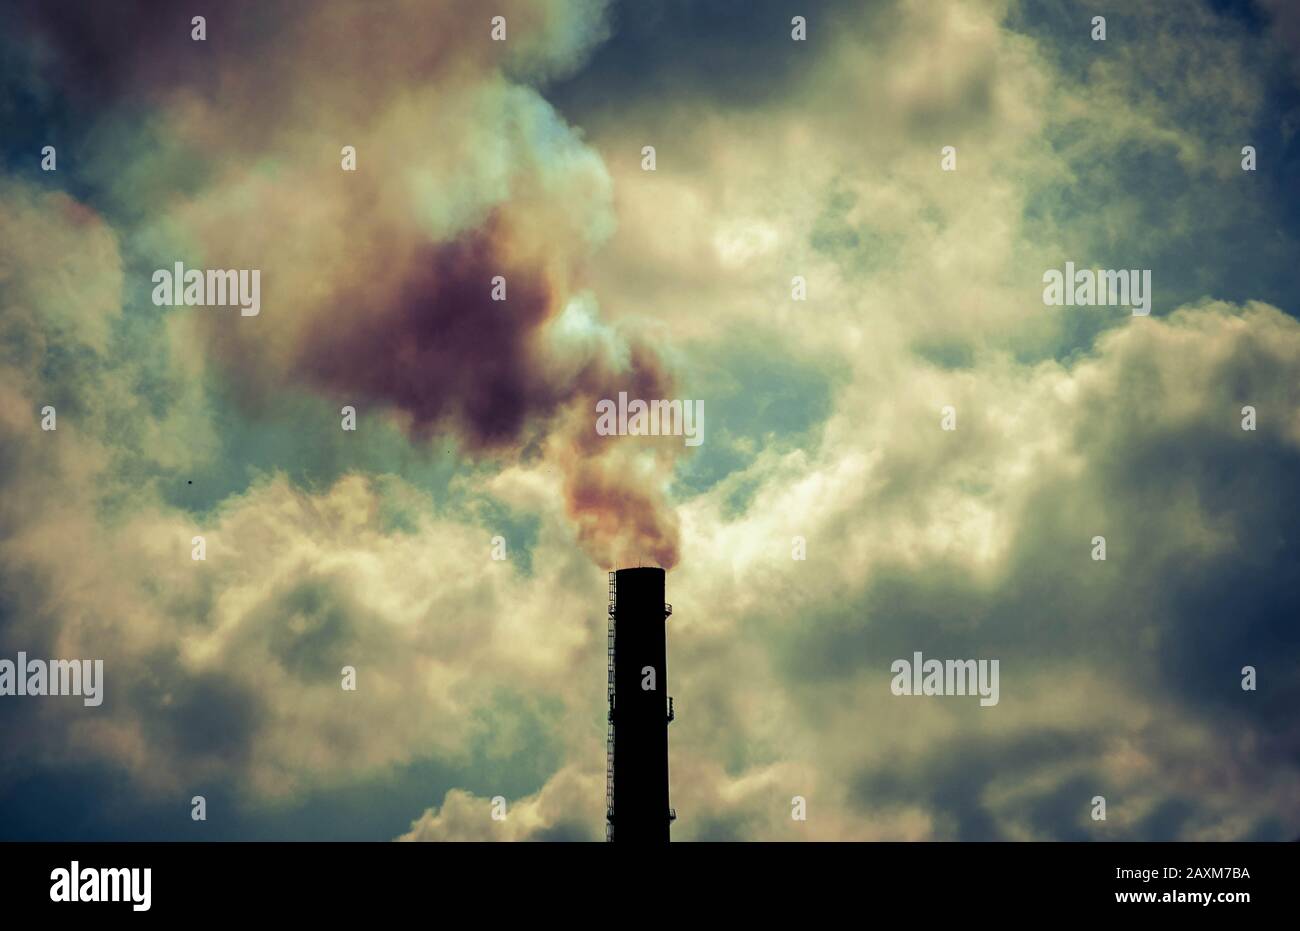 technogenic contrasting background tip of the black silhouette pipe with smoke sky with bright clouds and sun backlight Stock Photo